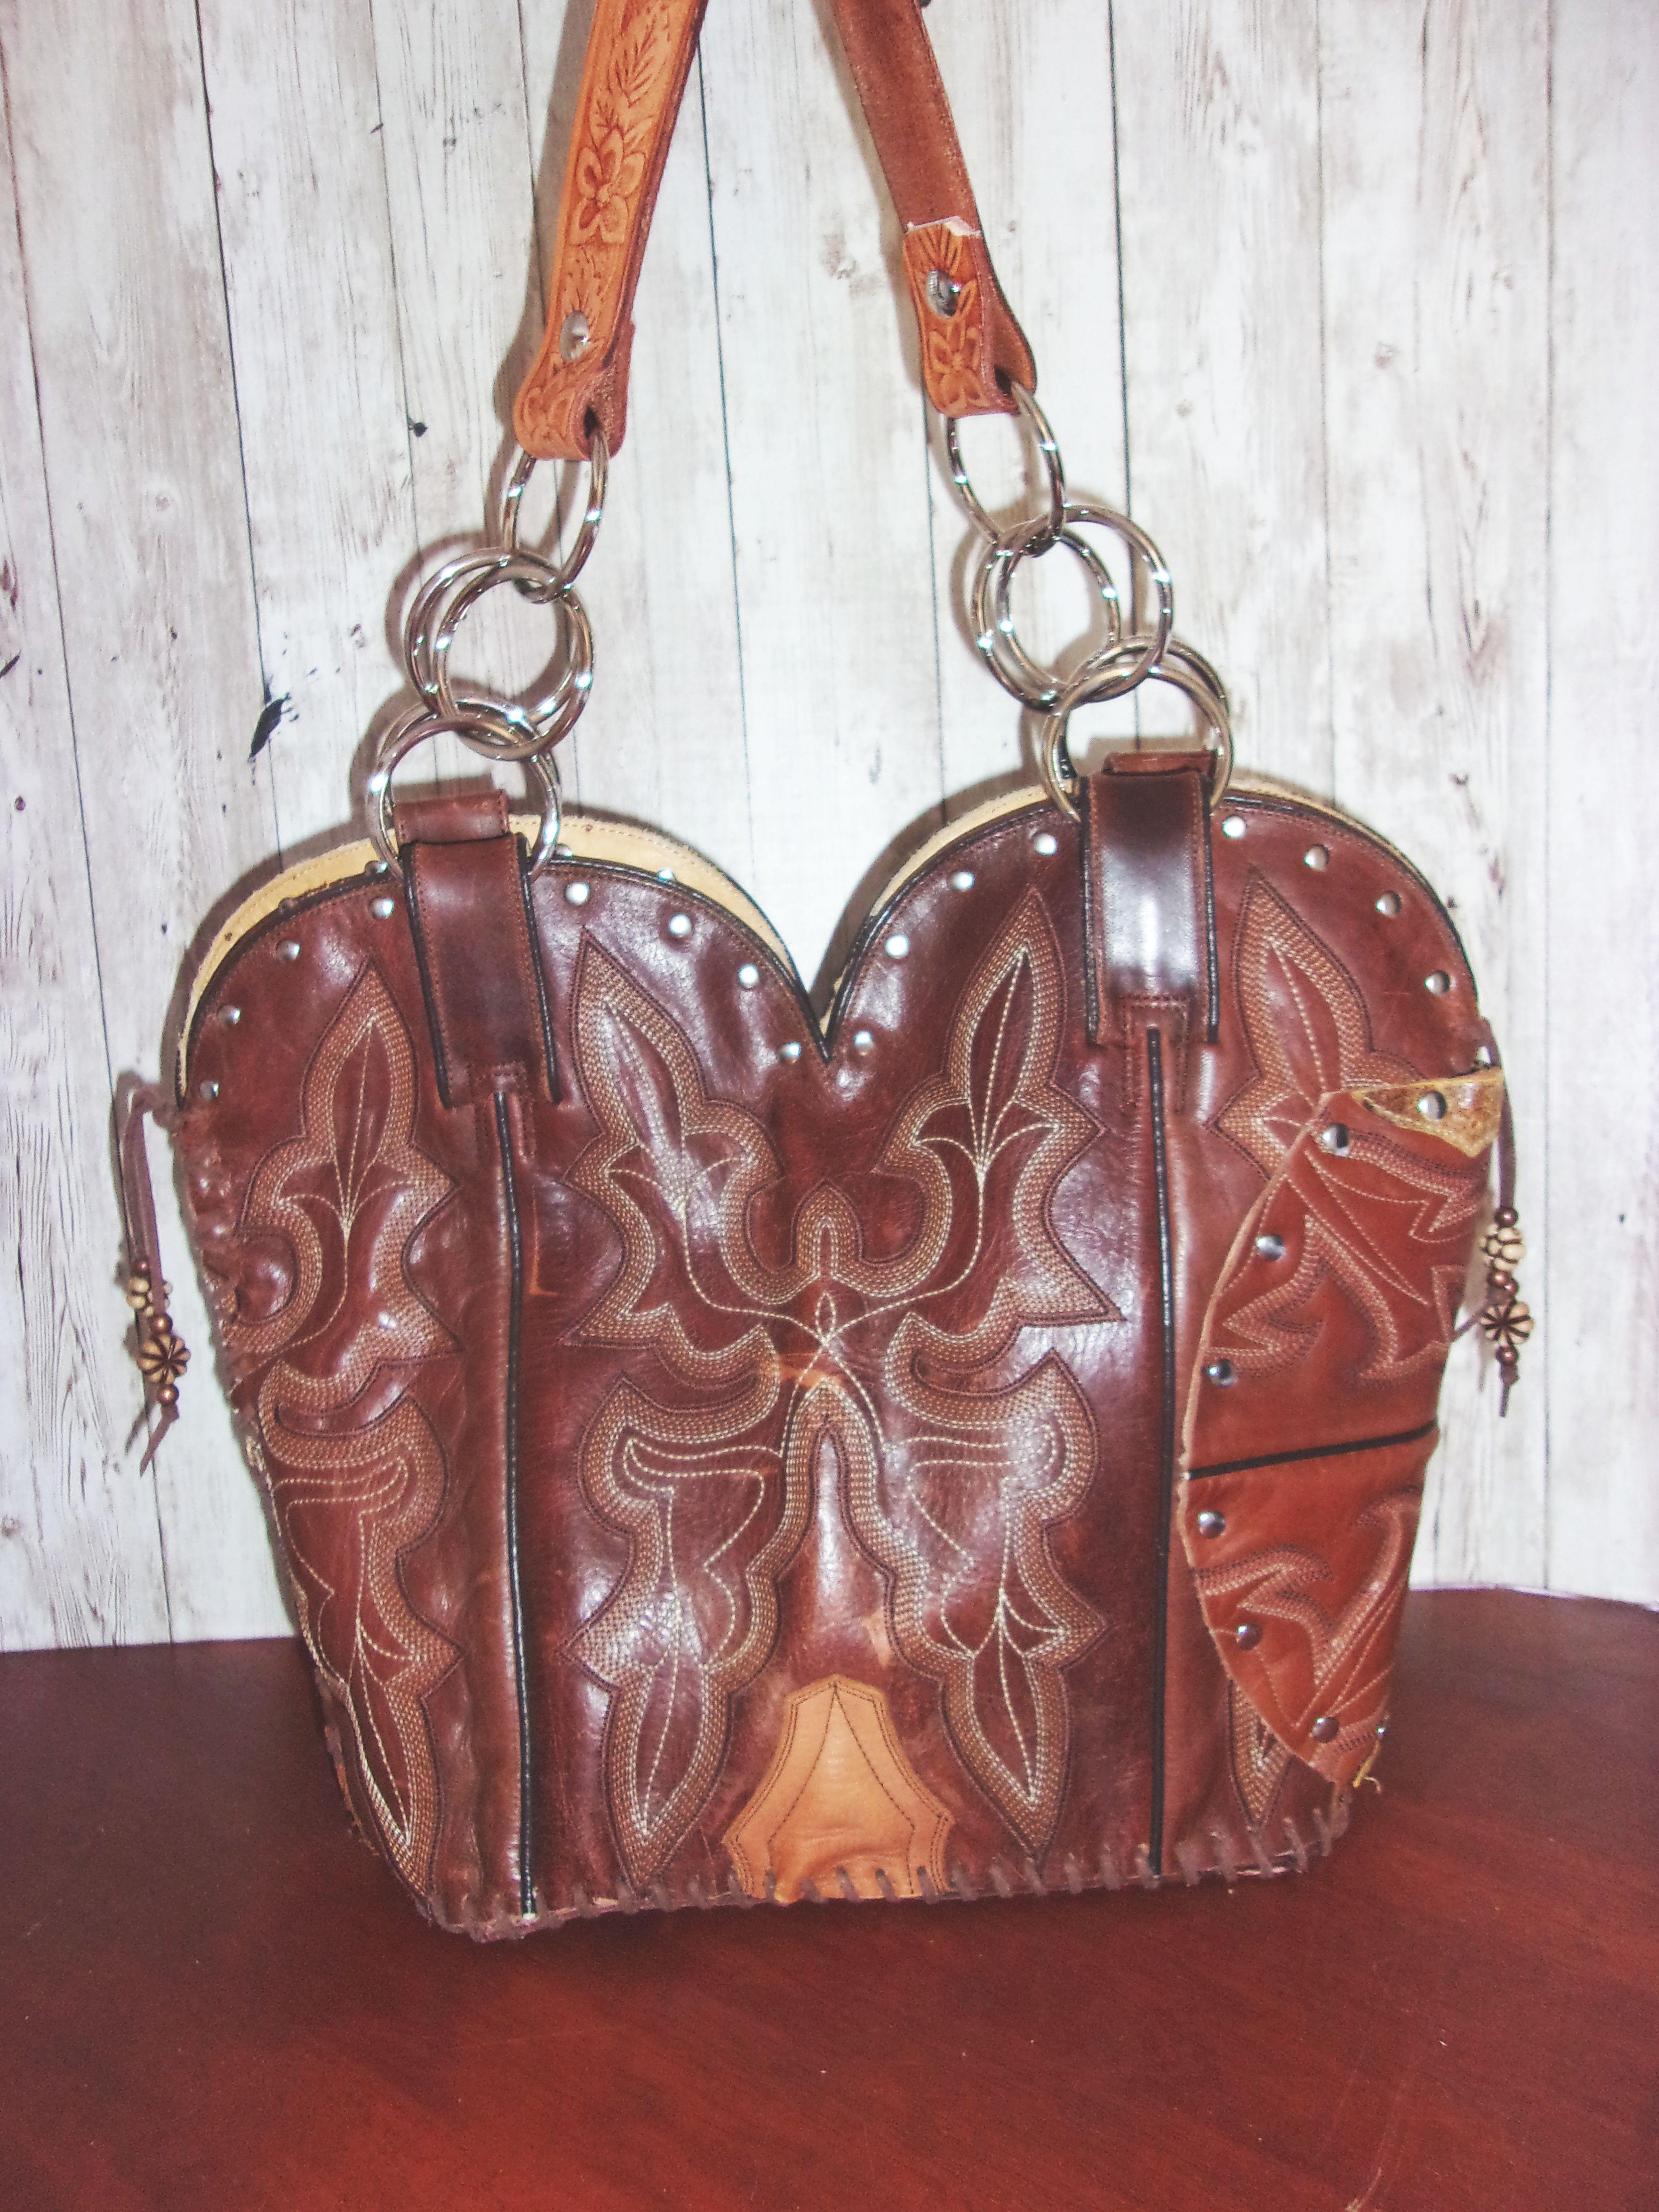 Western Concealed Carry Purse - CC Purse - Western Gun Purse - Handcrafted Conceal Carry Purse - Cowboy Boot Purse CB63 cowboy boot purses, western fringe purse, handmade leather purses, boot purse, handmade western purse, custom leather handbags Chris Thompson Bags